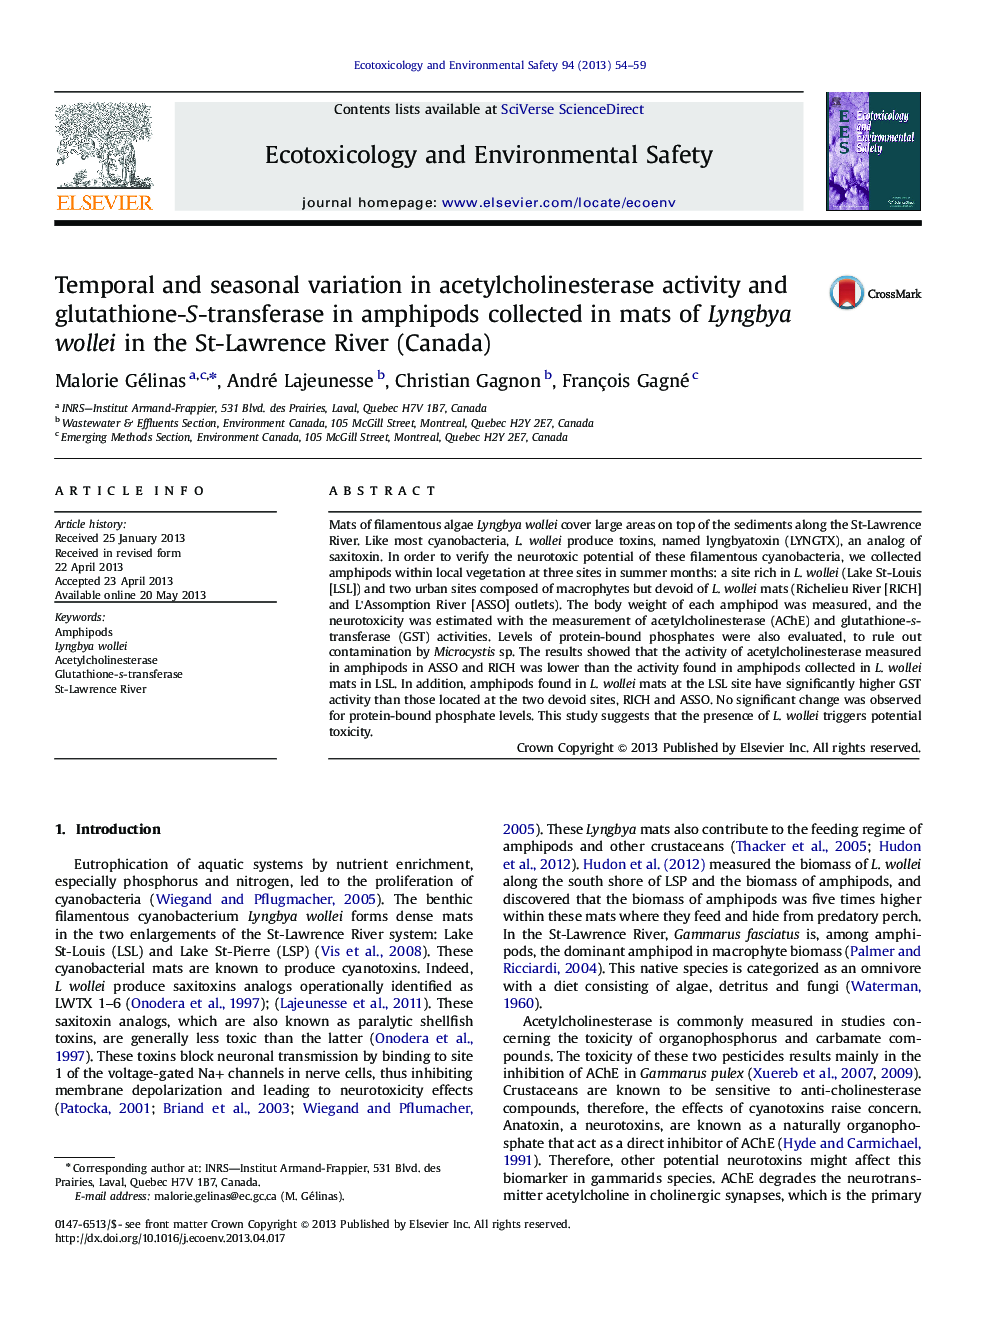 Temporal and seasonal variation in acetylcholinesterase activity and glutathione-S-transferase in amphipods collected in mats of Lyngbya wollei in the St-Lawrence River (Canada)